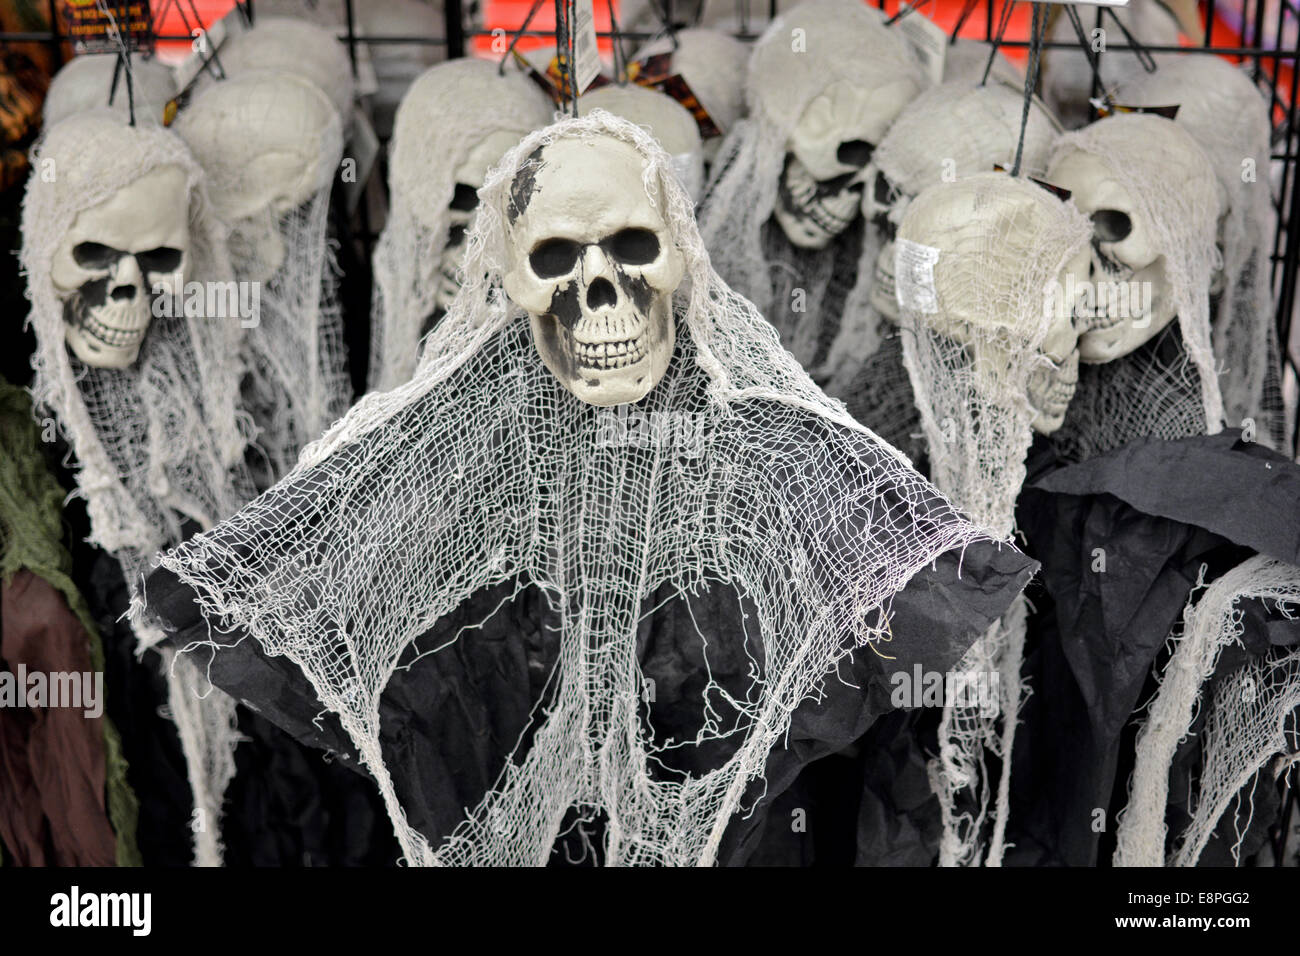 Display of Halloween decorations for sale at the Party City store ...